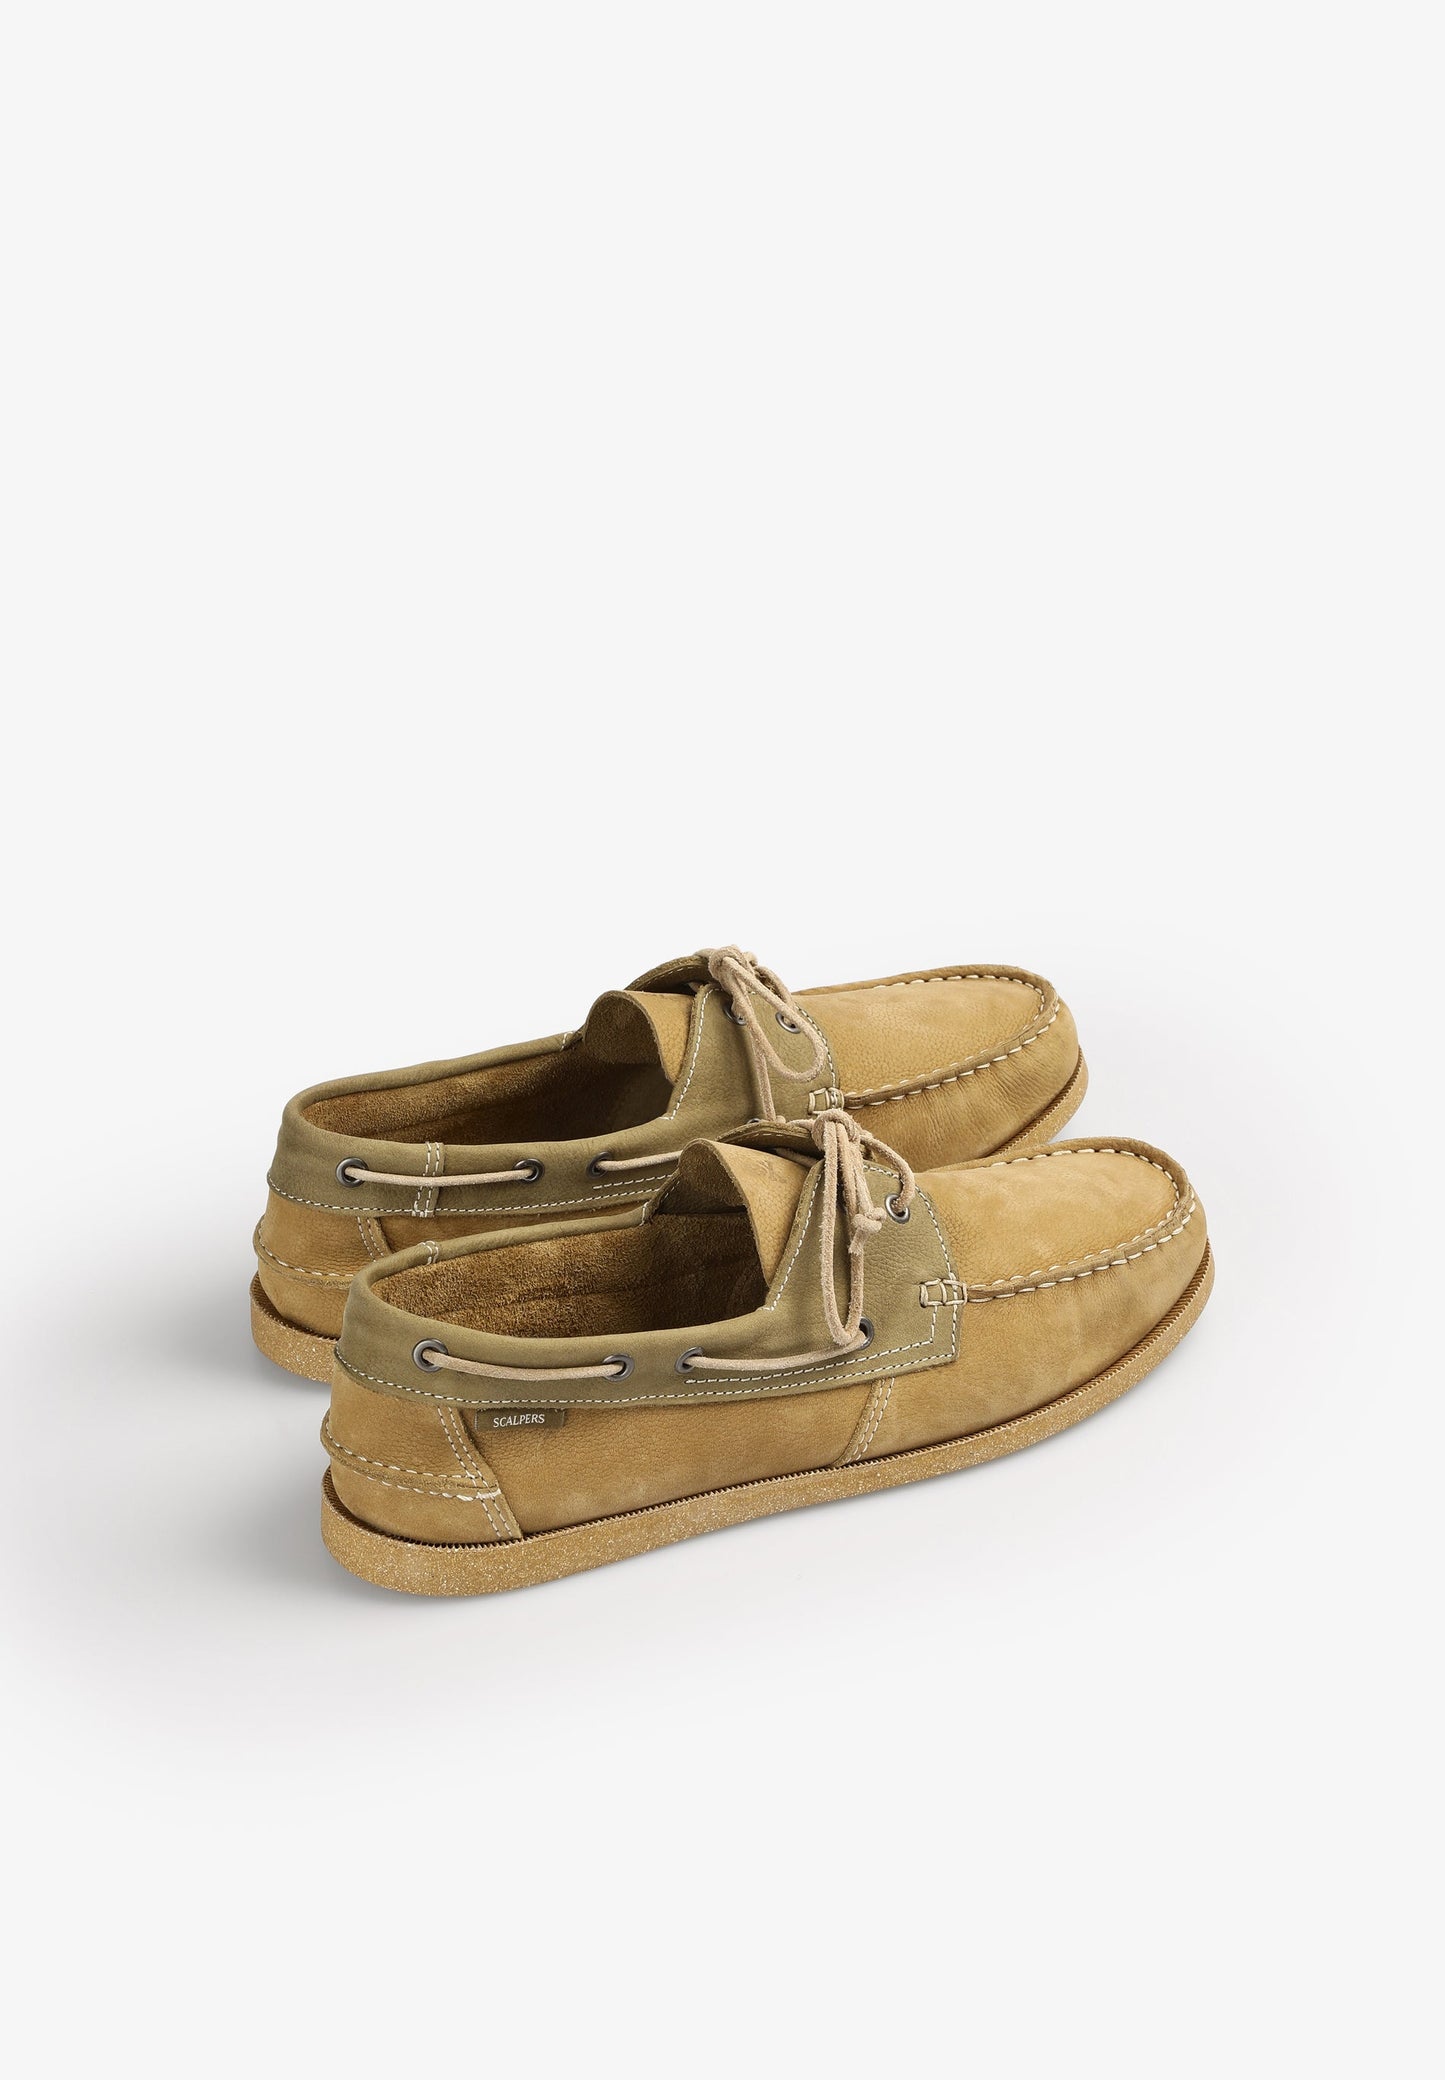 RECYCLED BOAT SHOES